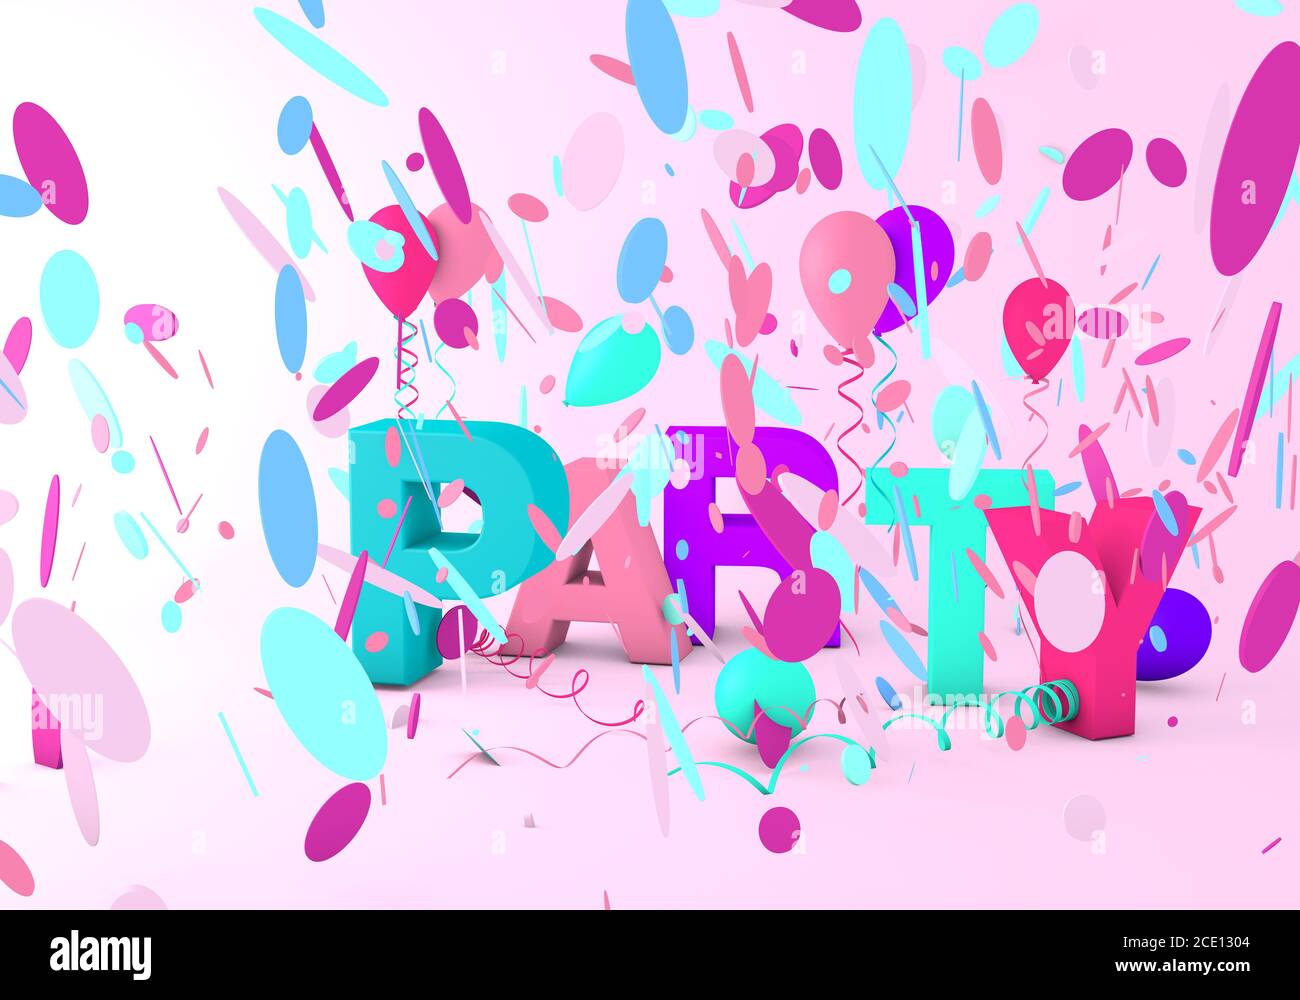 3d render of a party message with streamer, balloons and confetti Stock Photo